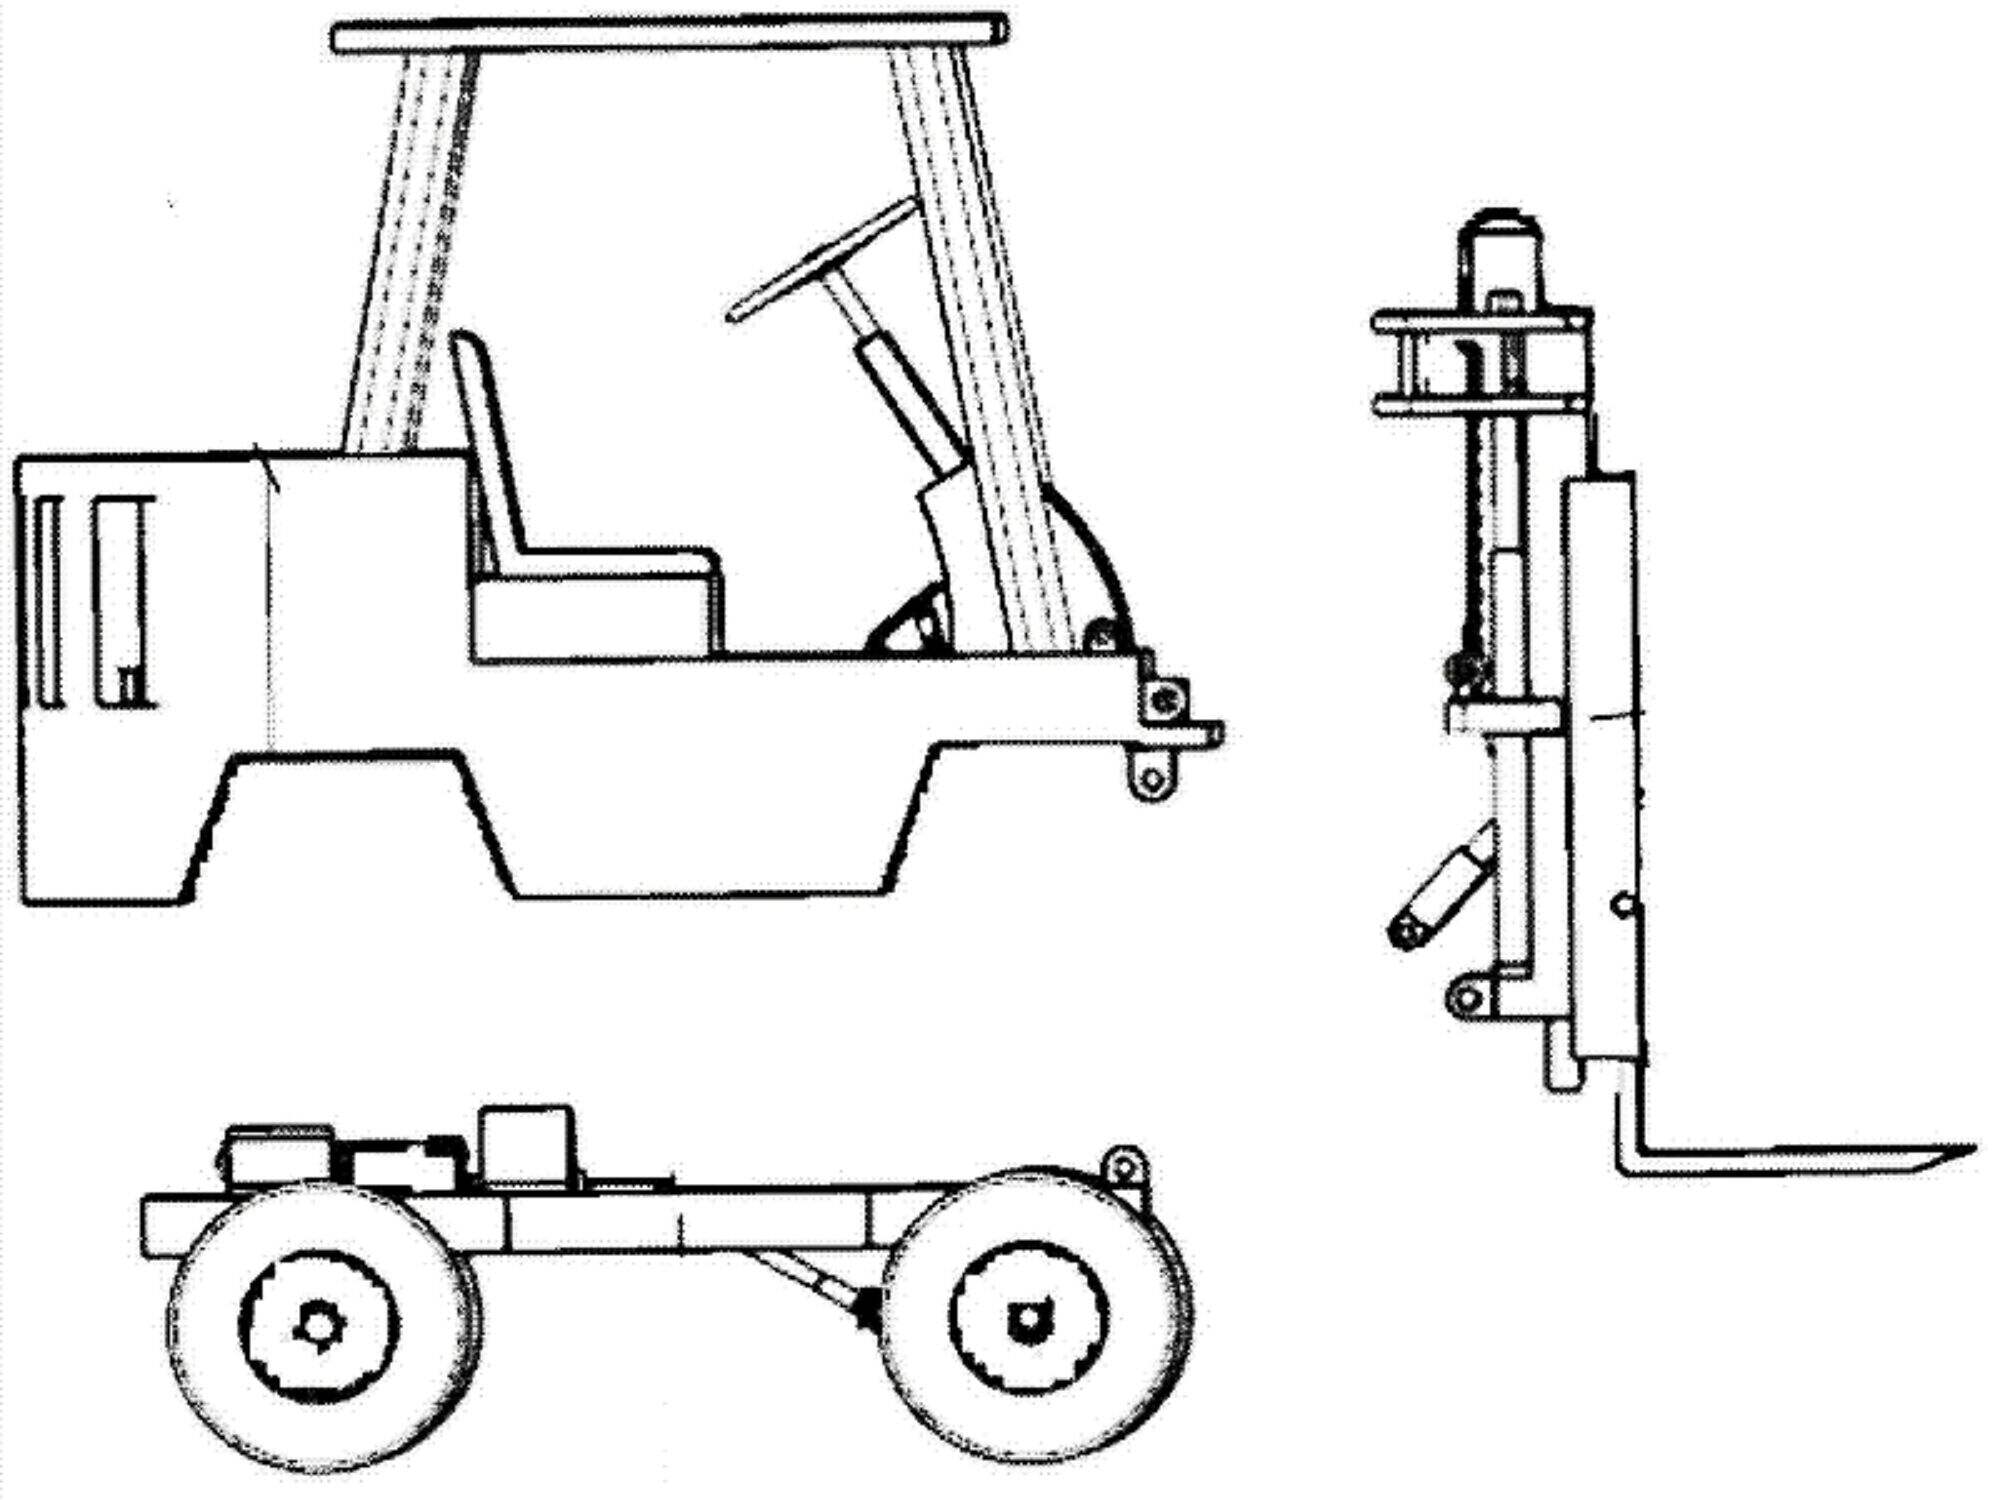 What are the main components of a forklift?